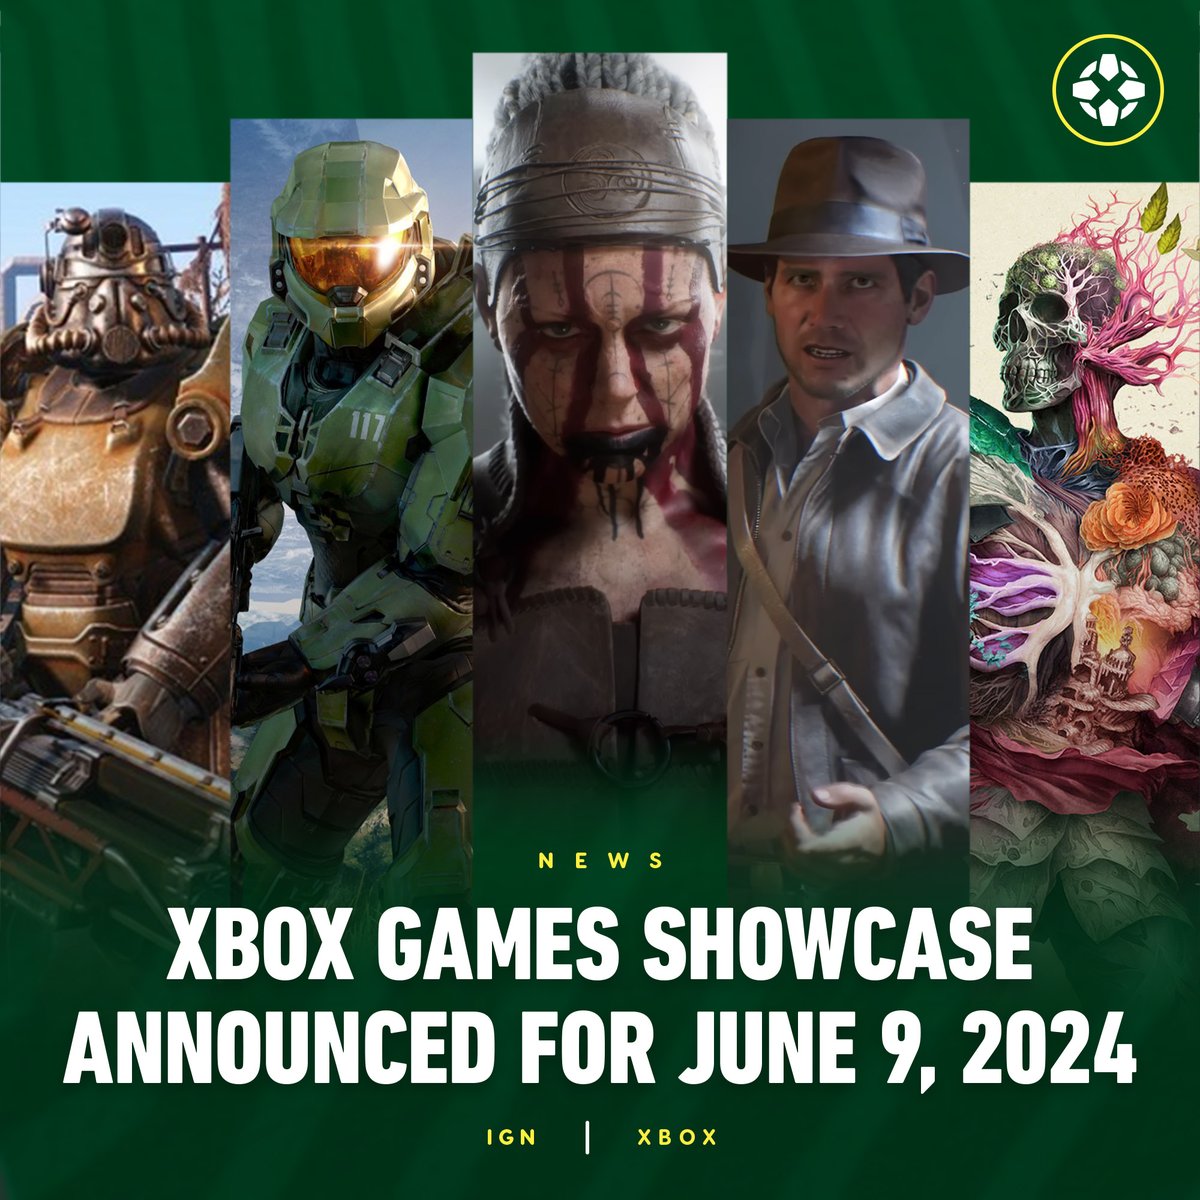 Microsoft has announced the Xbox Games Showcase for June 9th, promising announcements from Xbox Game Studios, Activision Blizzard, and Bethesda, along with a deep dive into a beloved (but redacted) franchise.

For more: bit.ly/3UozOQK